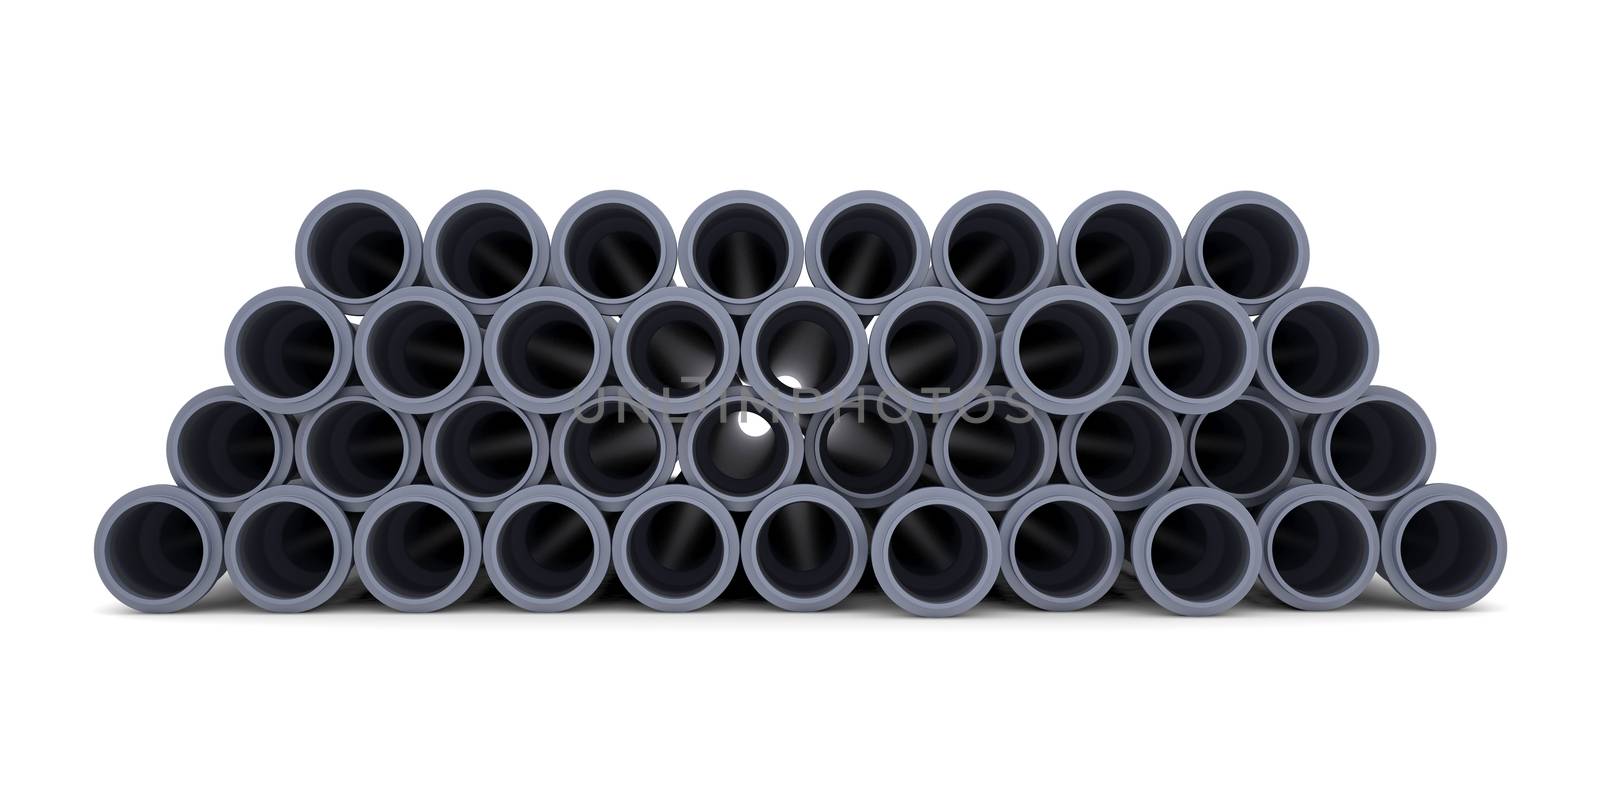 Grey PVC sewer pipes. Isolated render on white background